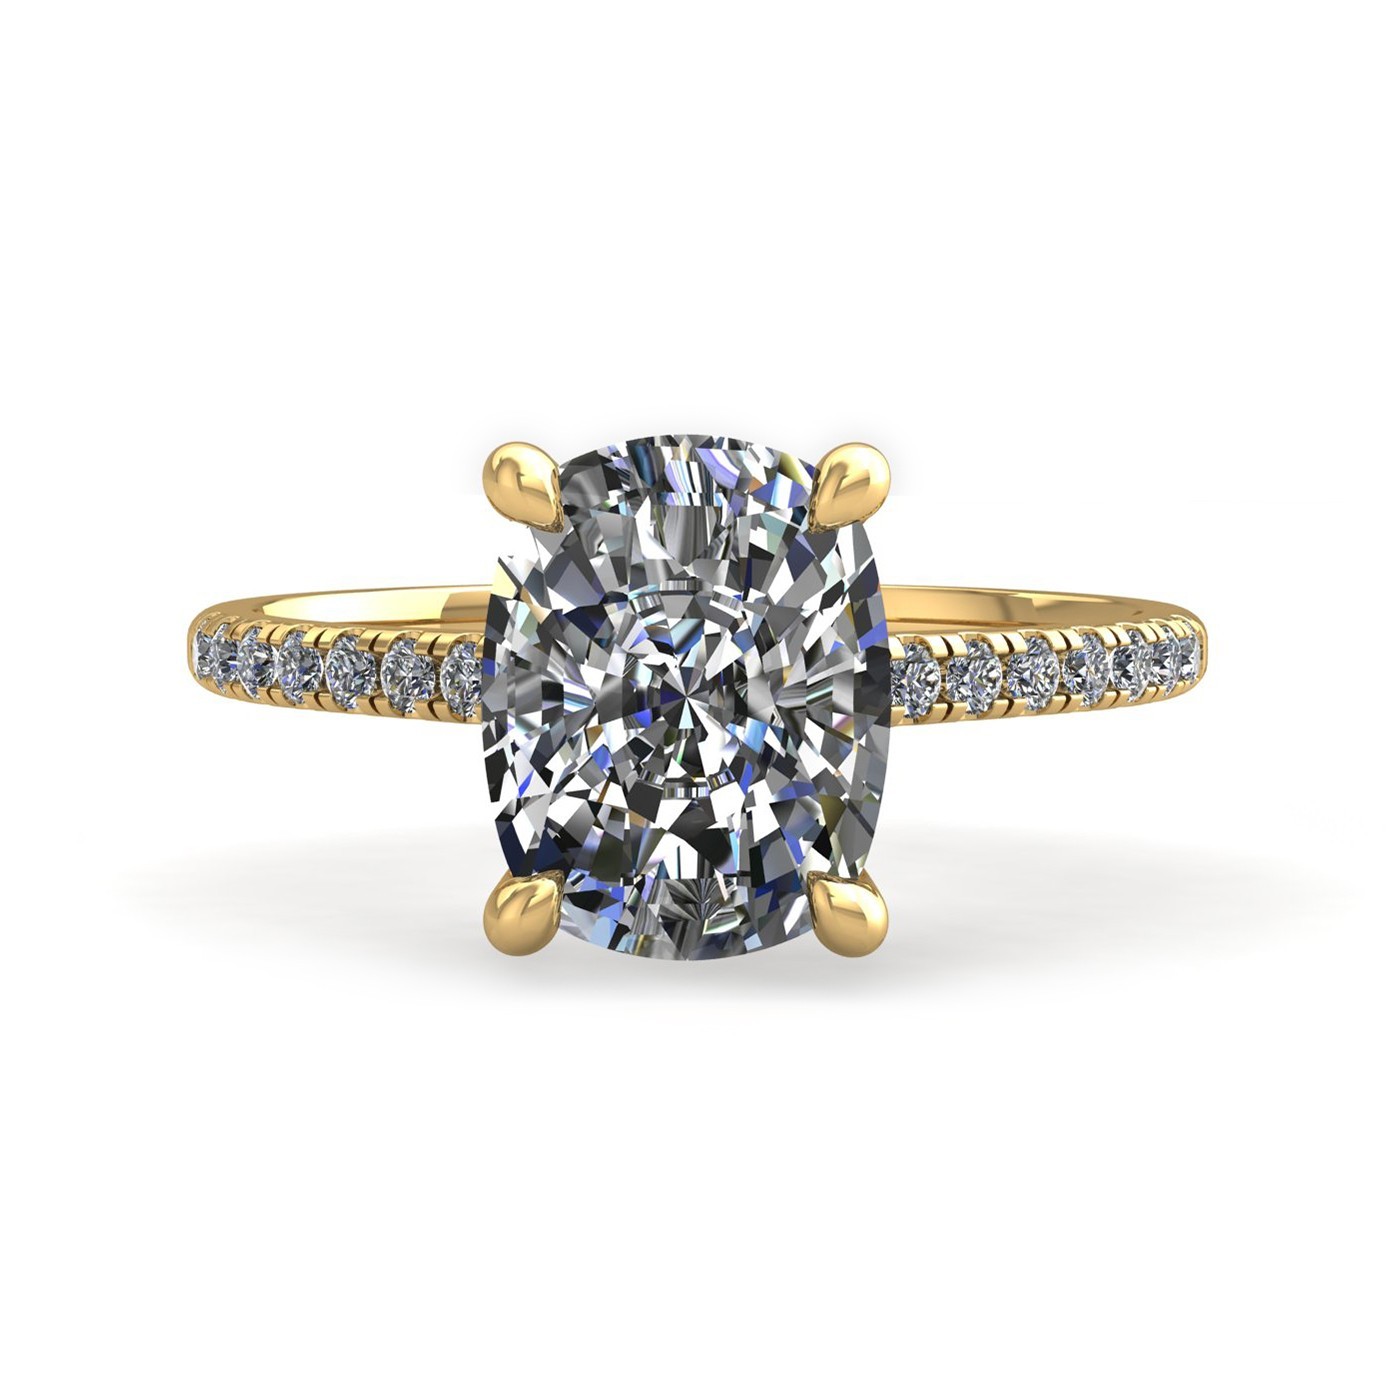 18k yellow gold 0,30 ct 4 prongs cushion cut diamond engagement ring with whisper thin pavÉ set band Photos & images